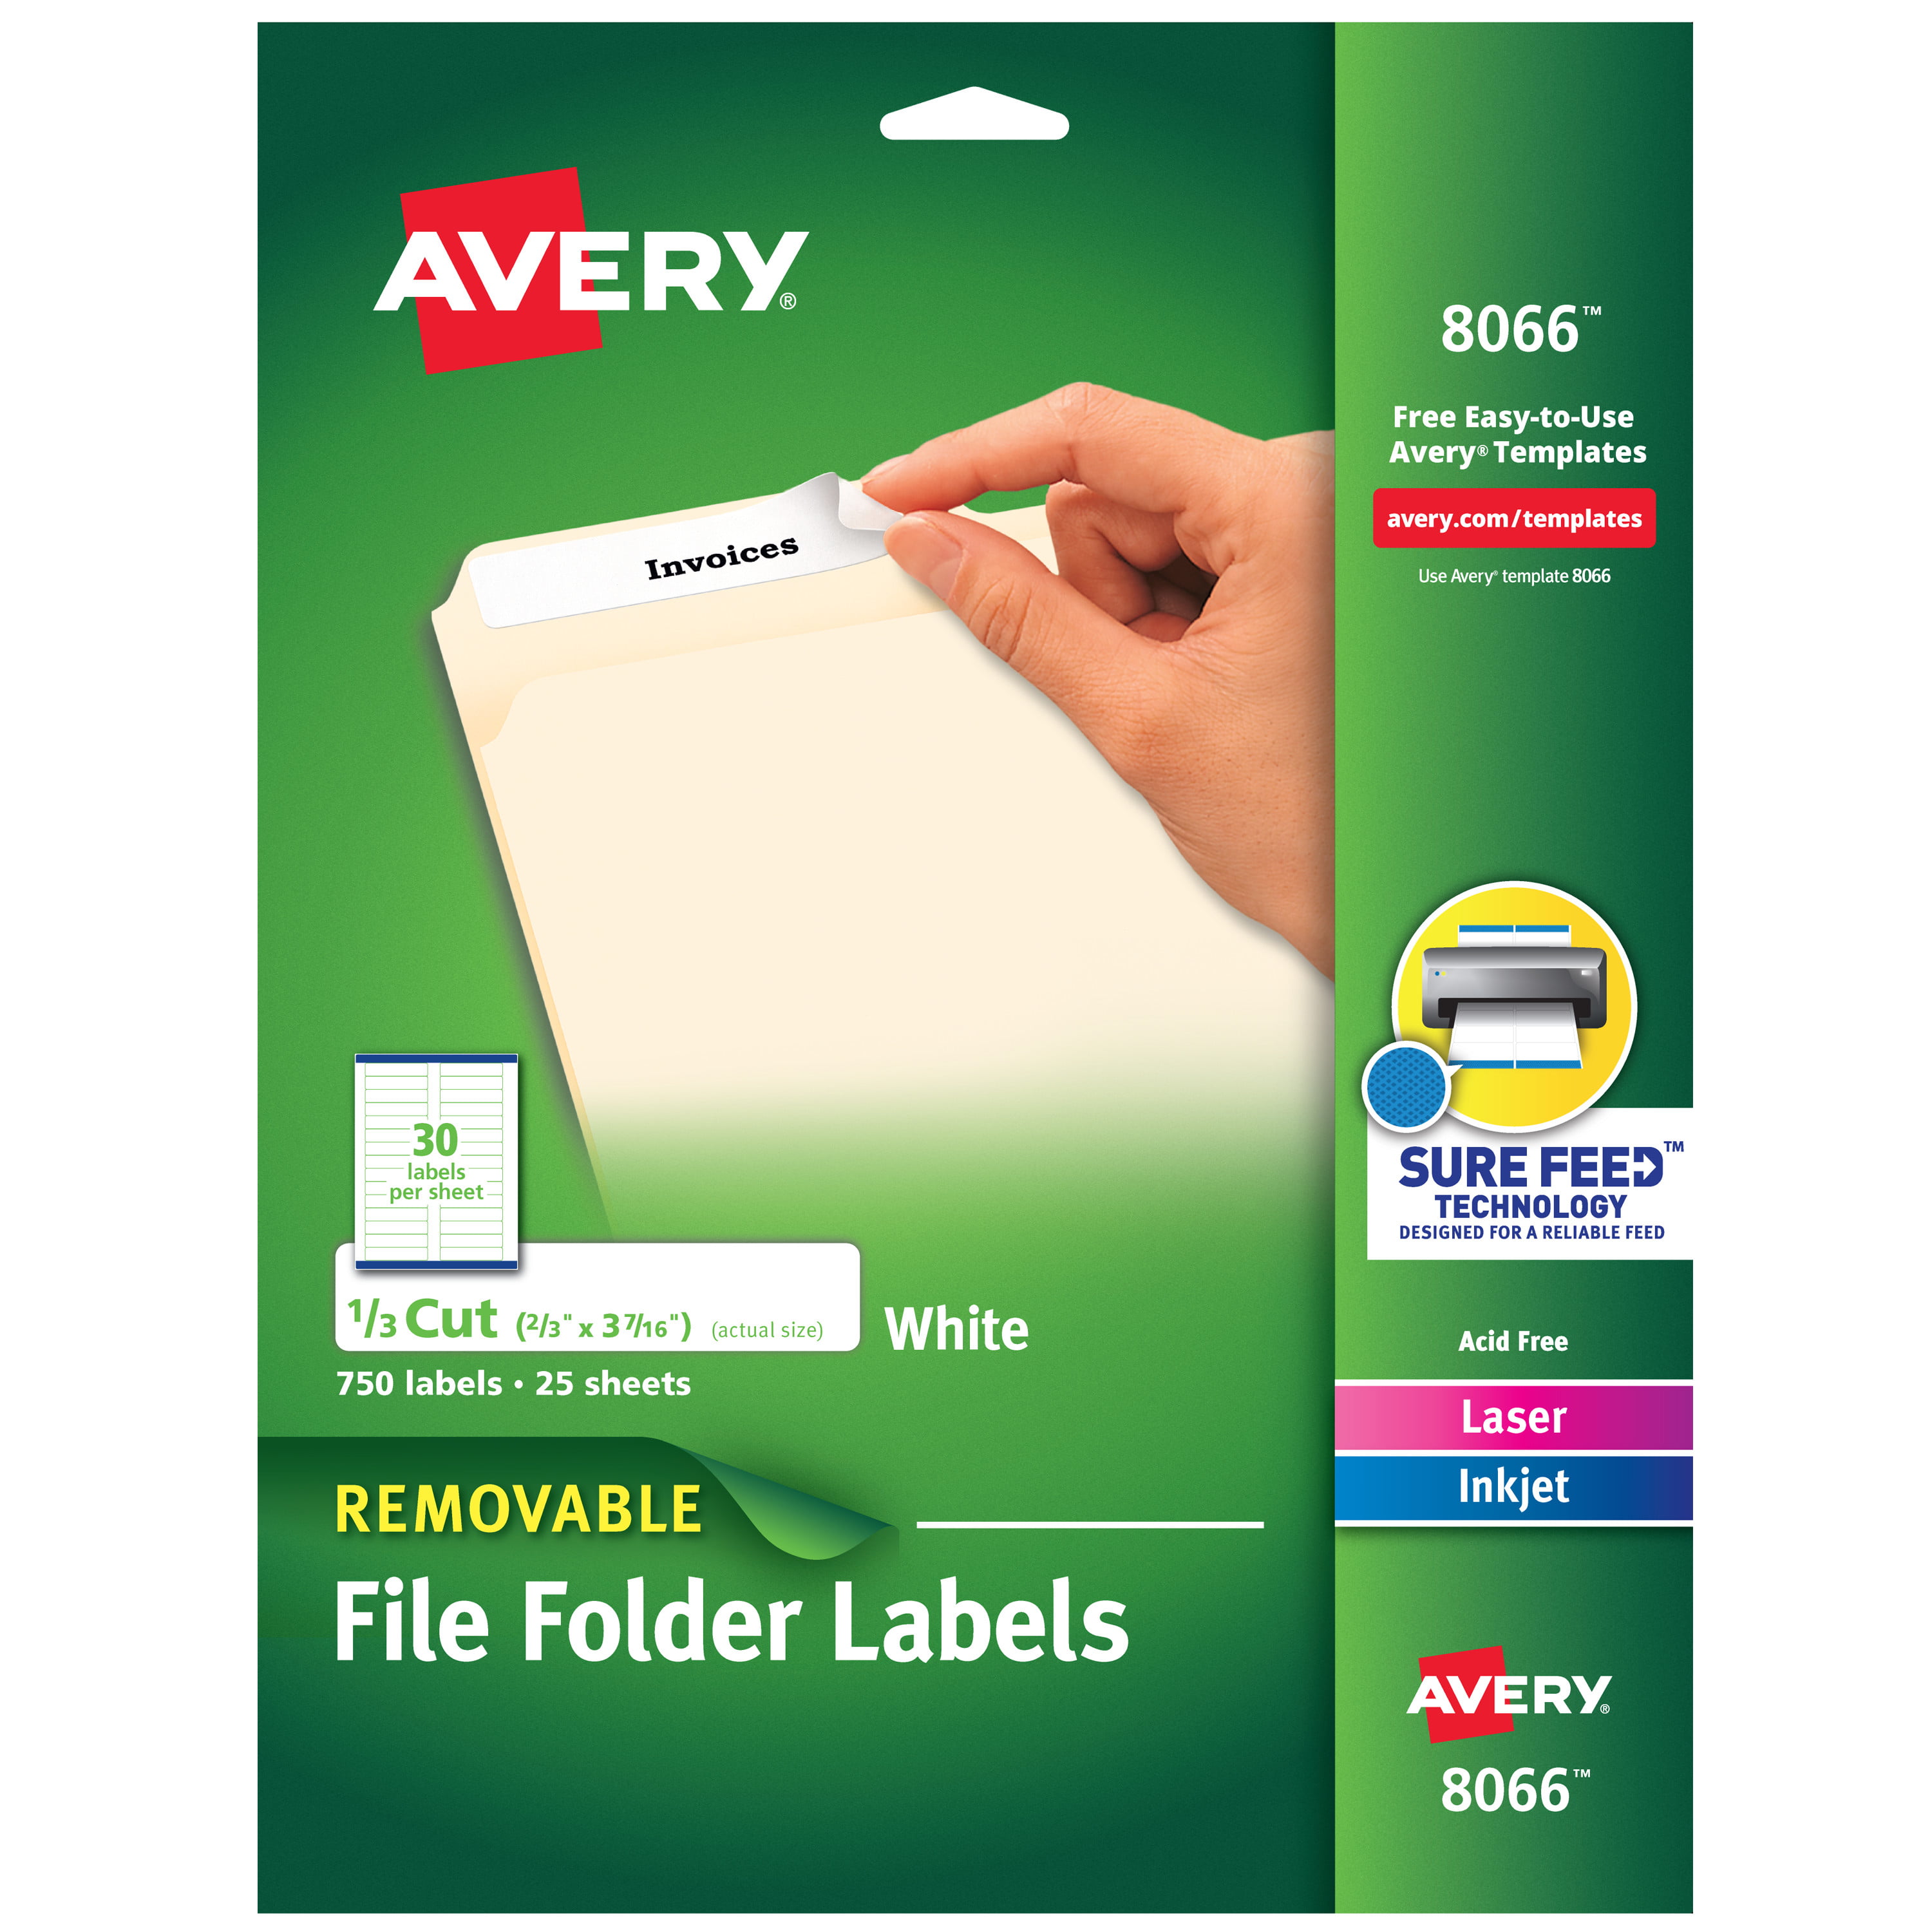 Avery Permanent Adhesive File Folder Labels 8366 for sale online